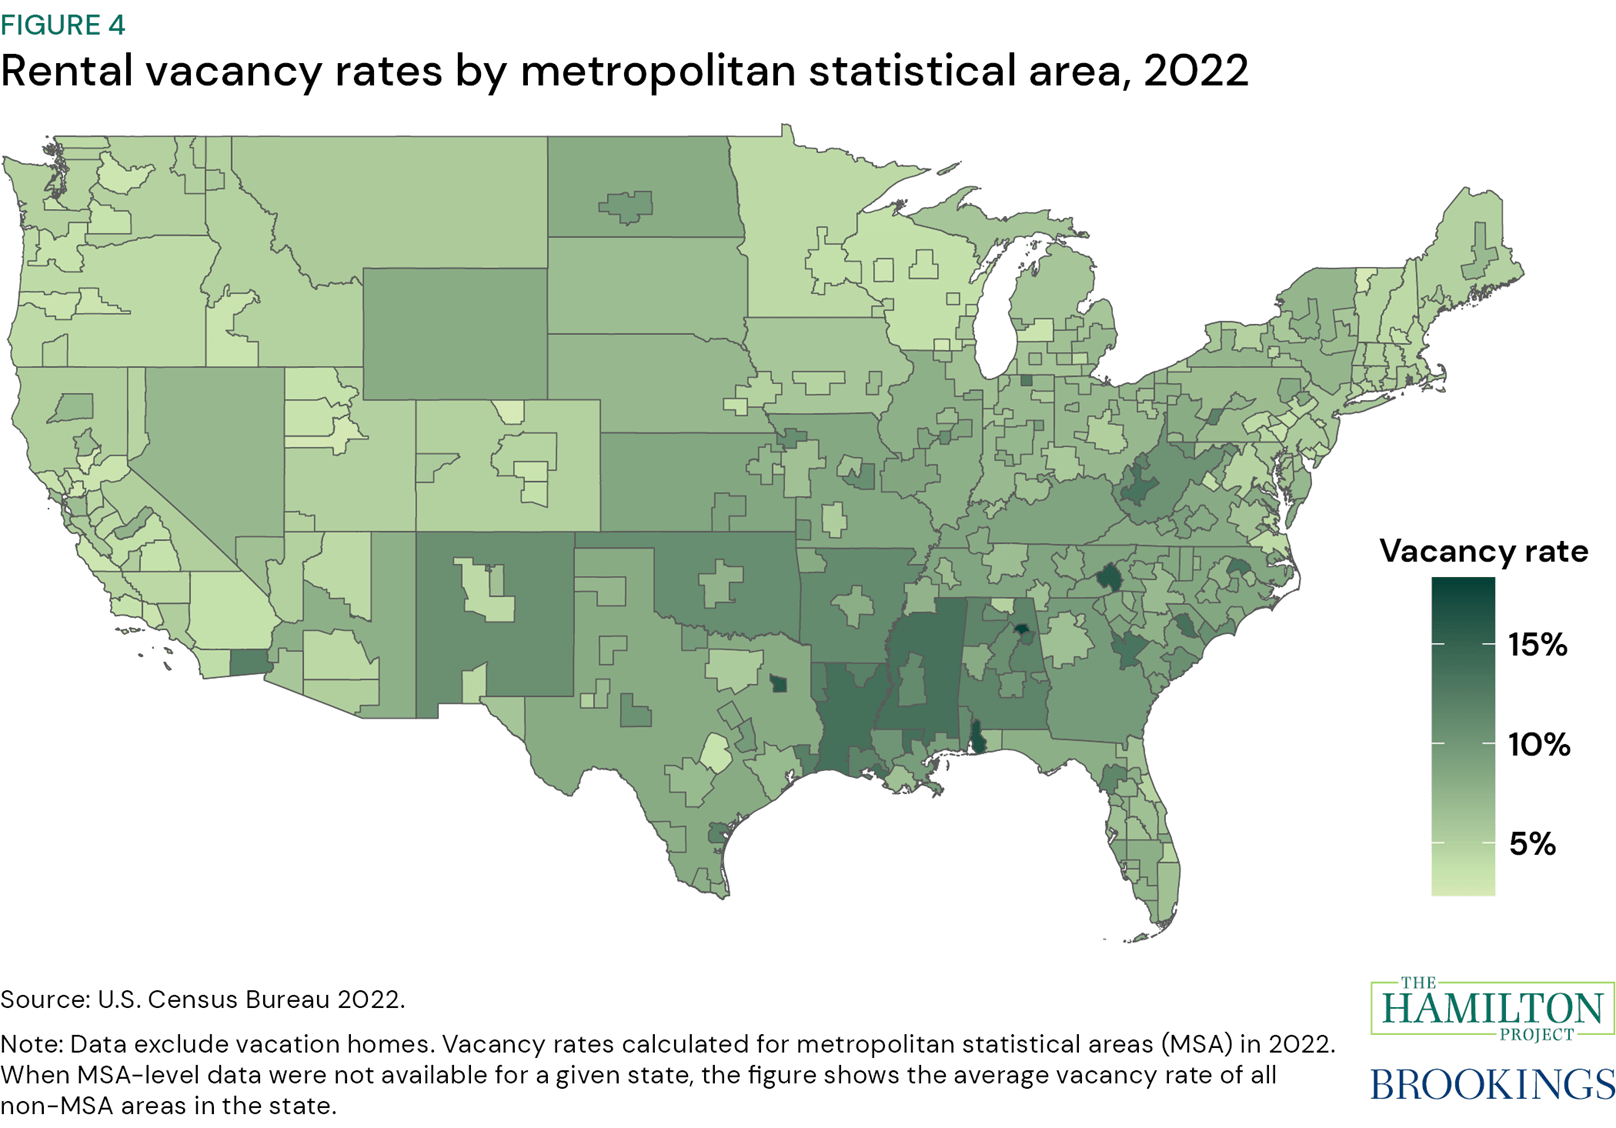 Figure 4: Rental vacancy rates by metropolitan statistical area, 2022. Note: Vacancy rates calculated for metropolitan statistical areas (MSA) in 2022. When MSA-level data were not available for a given state, the figure shows the average vacancy rate of all non-MSA areas in the state.